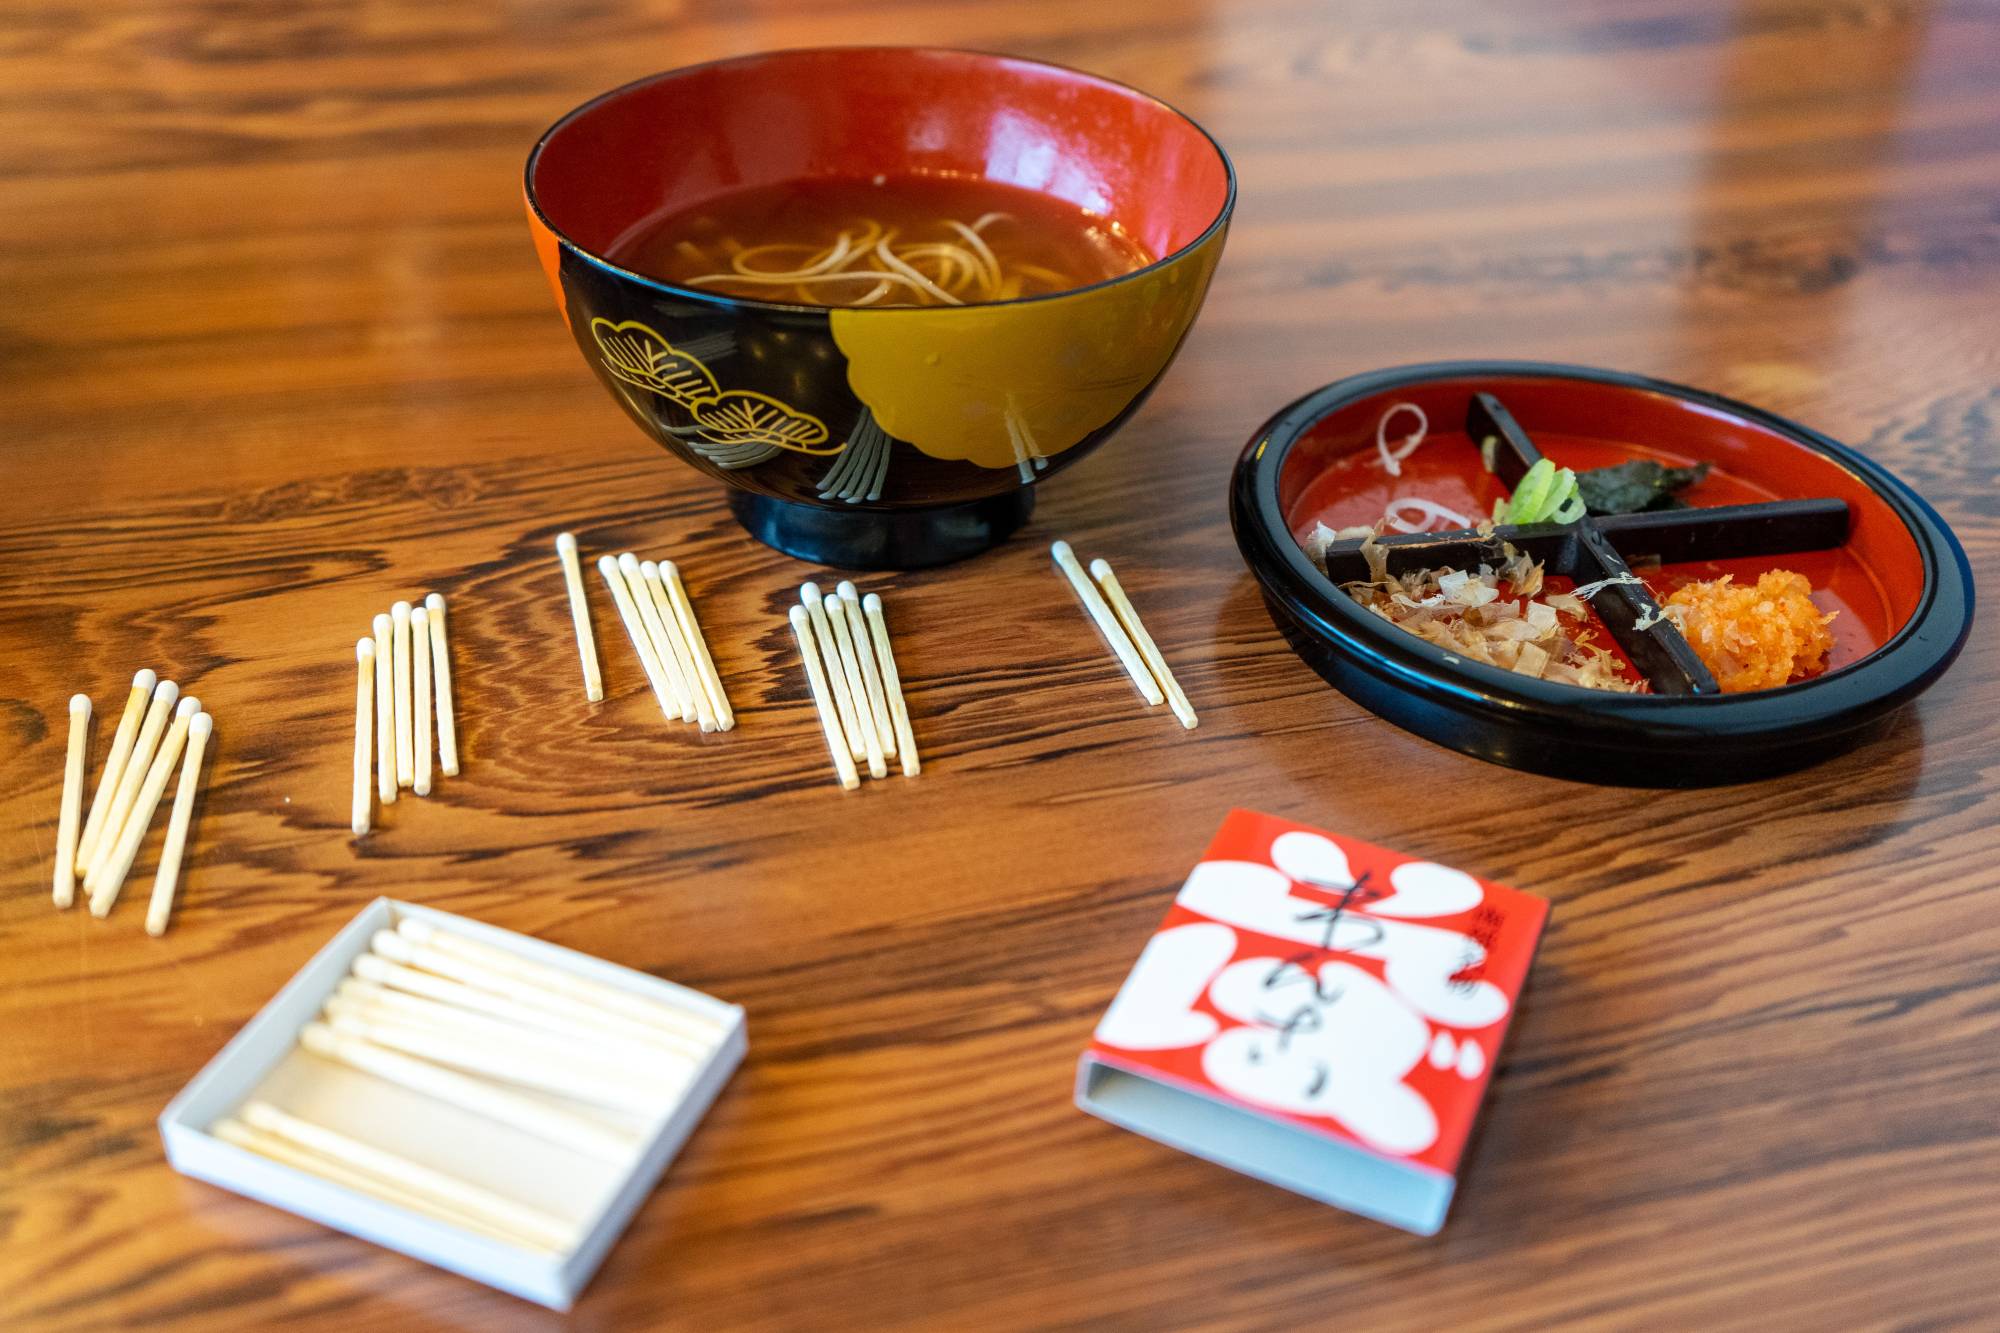 Just one more: Fifteen bowls of wanko soba roughly equate to one standard serving of noodles. Diners keep eating until they’re full. | OSCAR BOYD